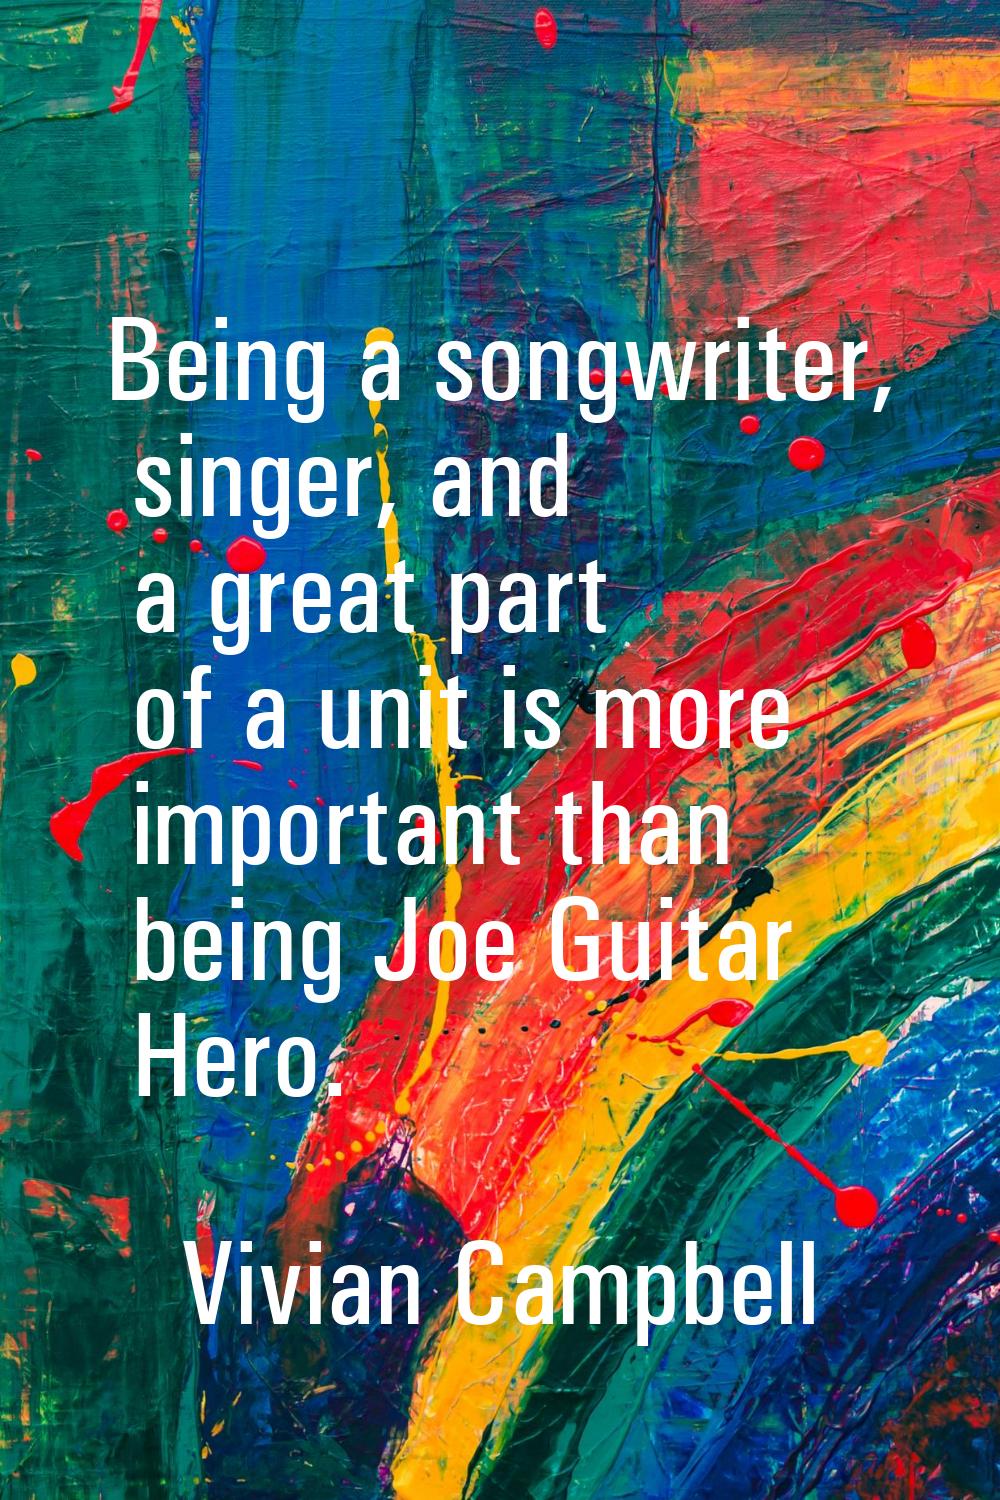 Being a songwriter, singer, and a great part of a unit is more important than being Joe Guitar Hero